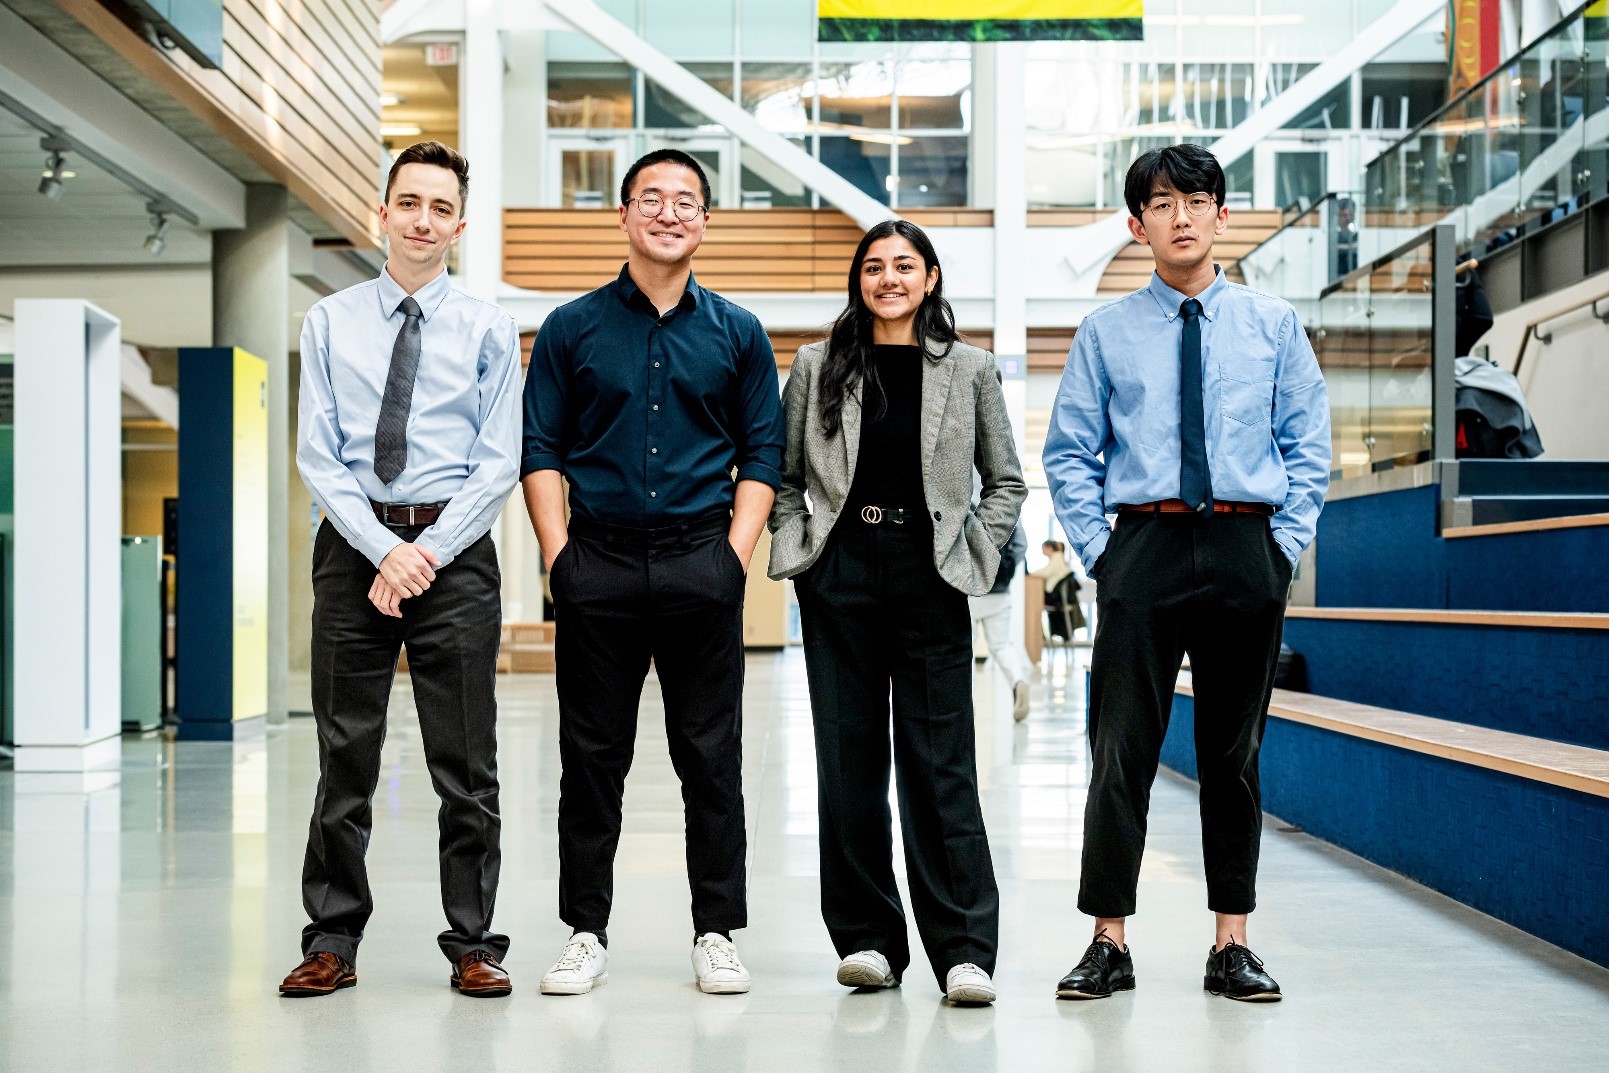 BCIT Accounting students win first place in national business valuation challenge